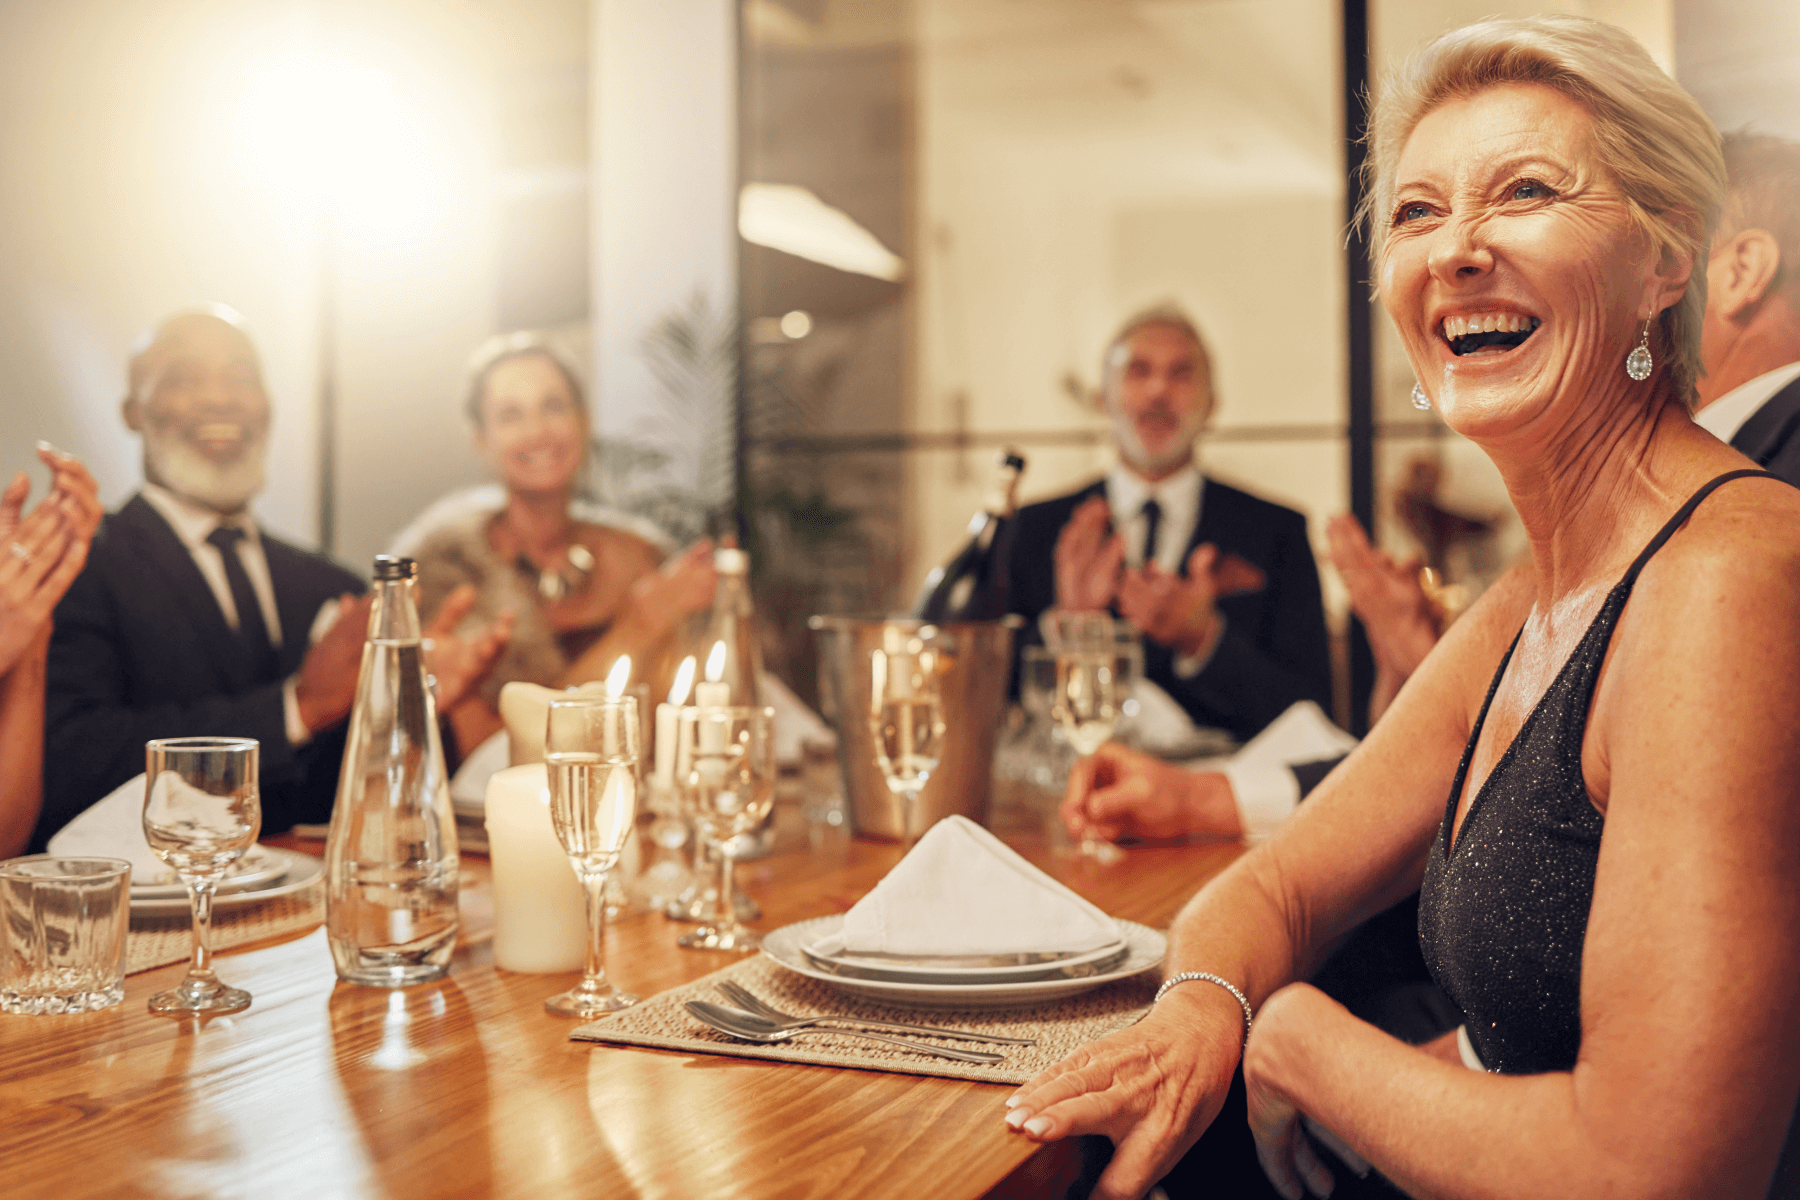 A laughing woman at a dinner table with other well-dressed guests, who are clapping.